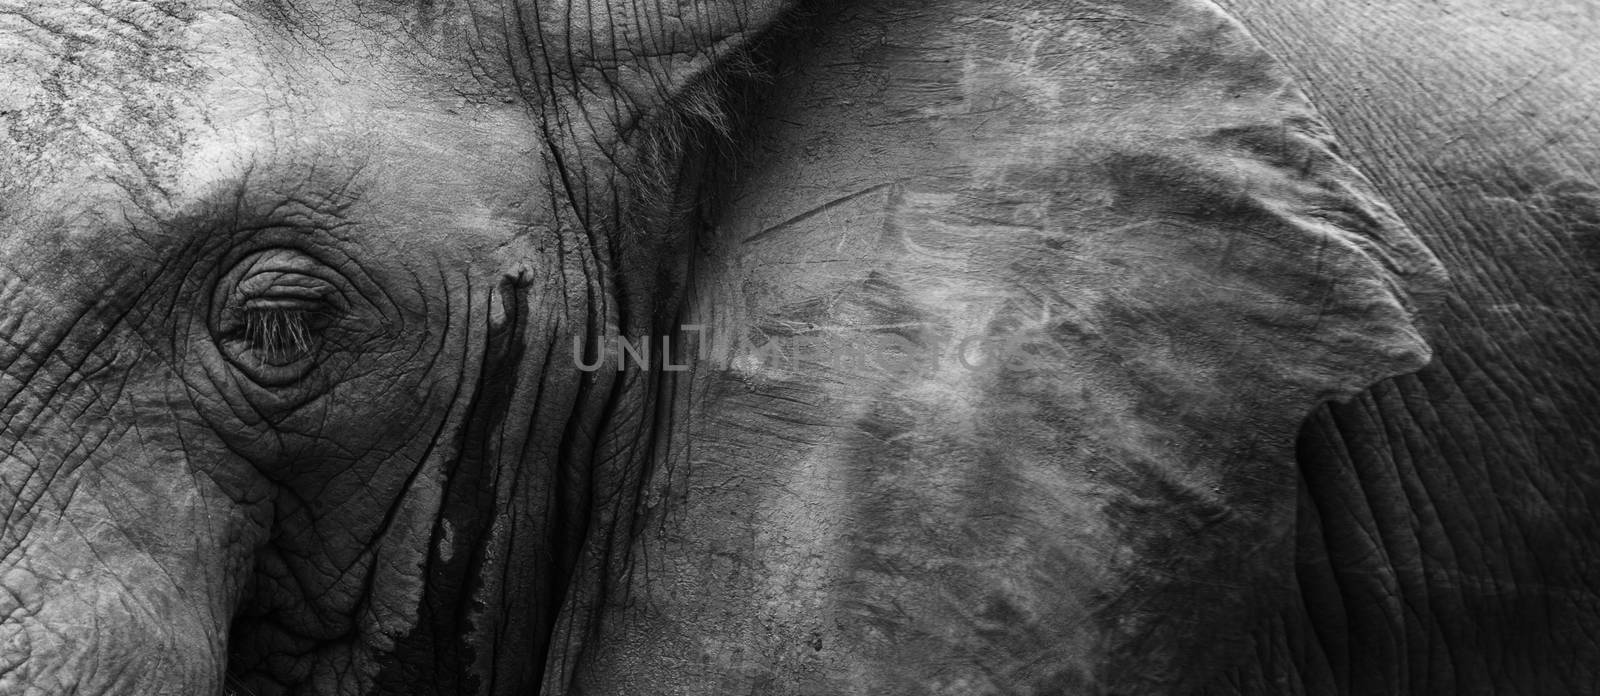 Close up detail of an African elephant eye and ear